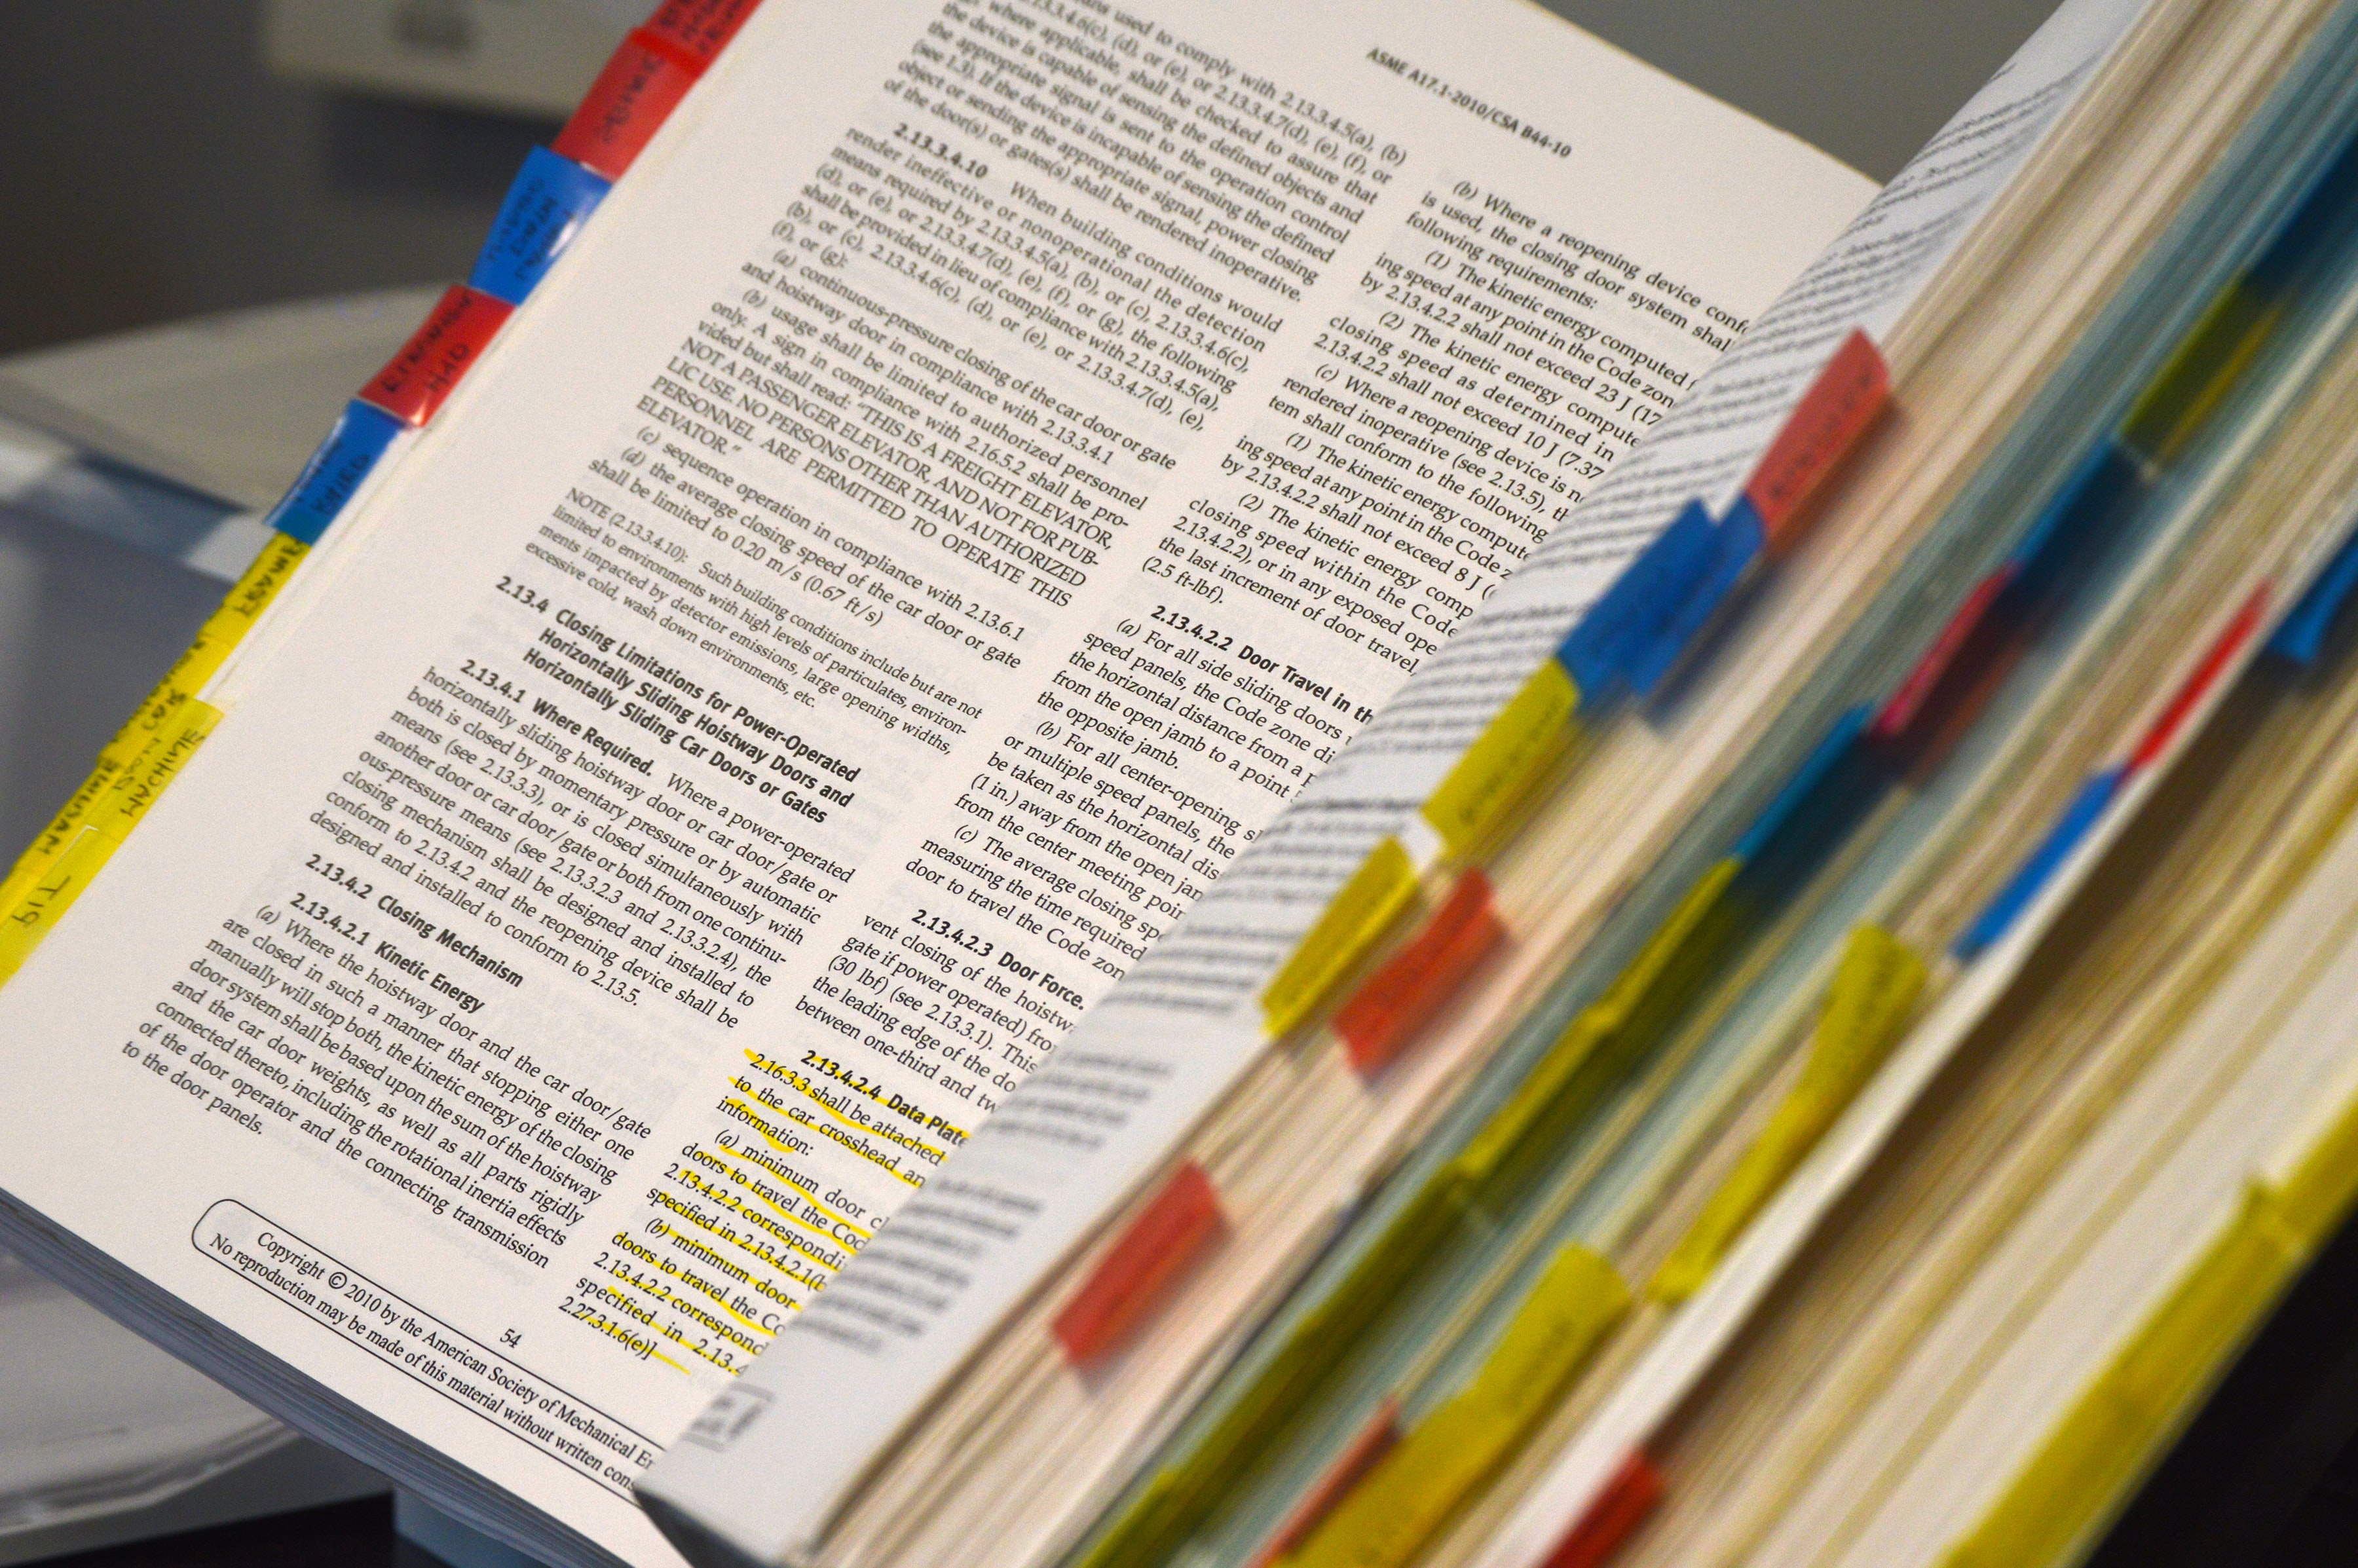 A textbook with highlighted and bookmarked pages